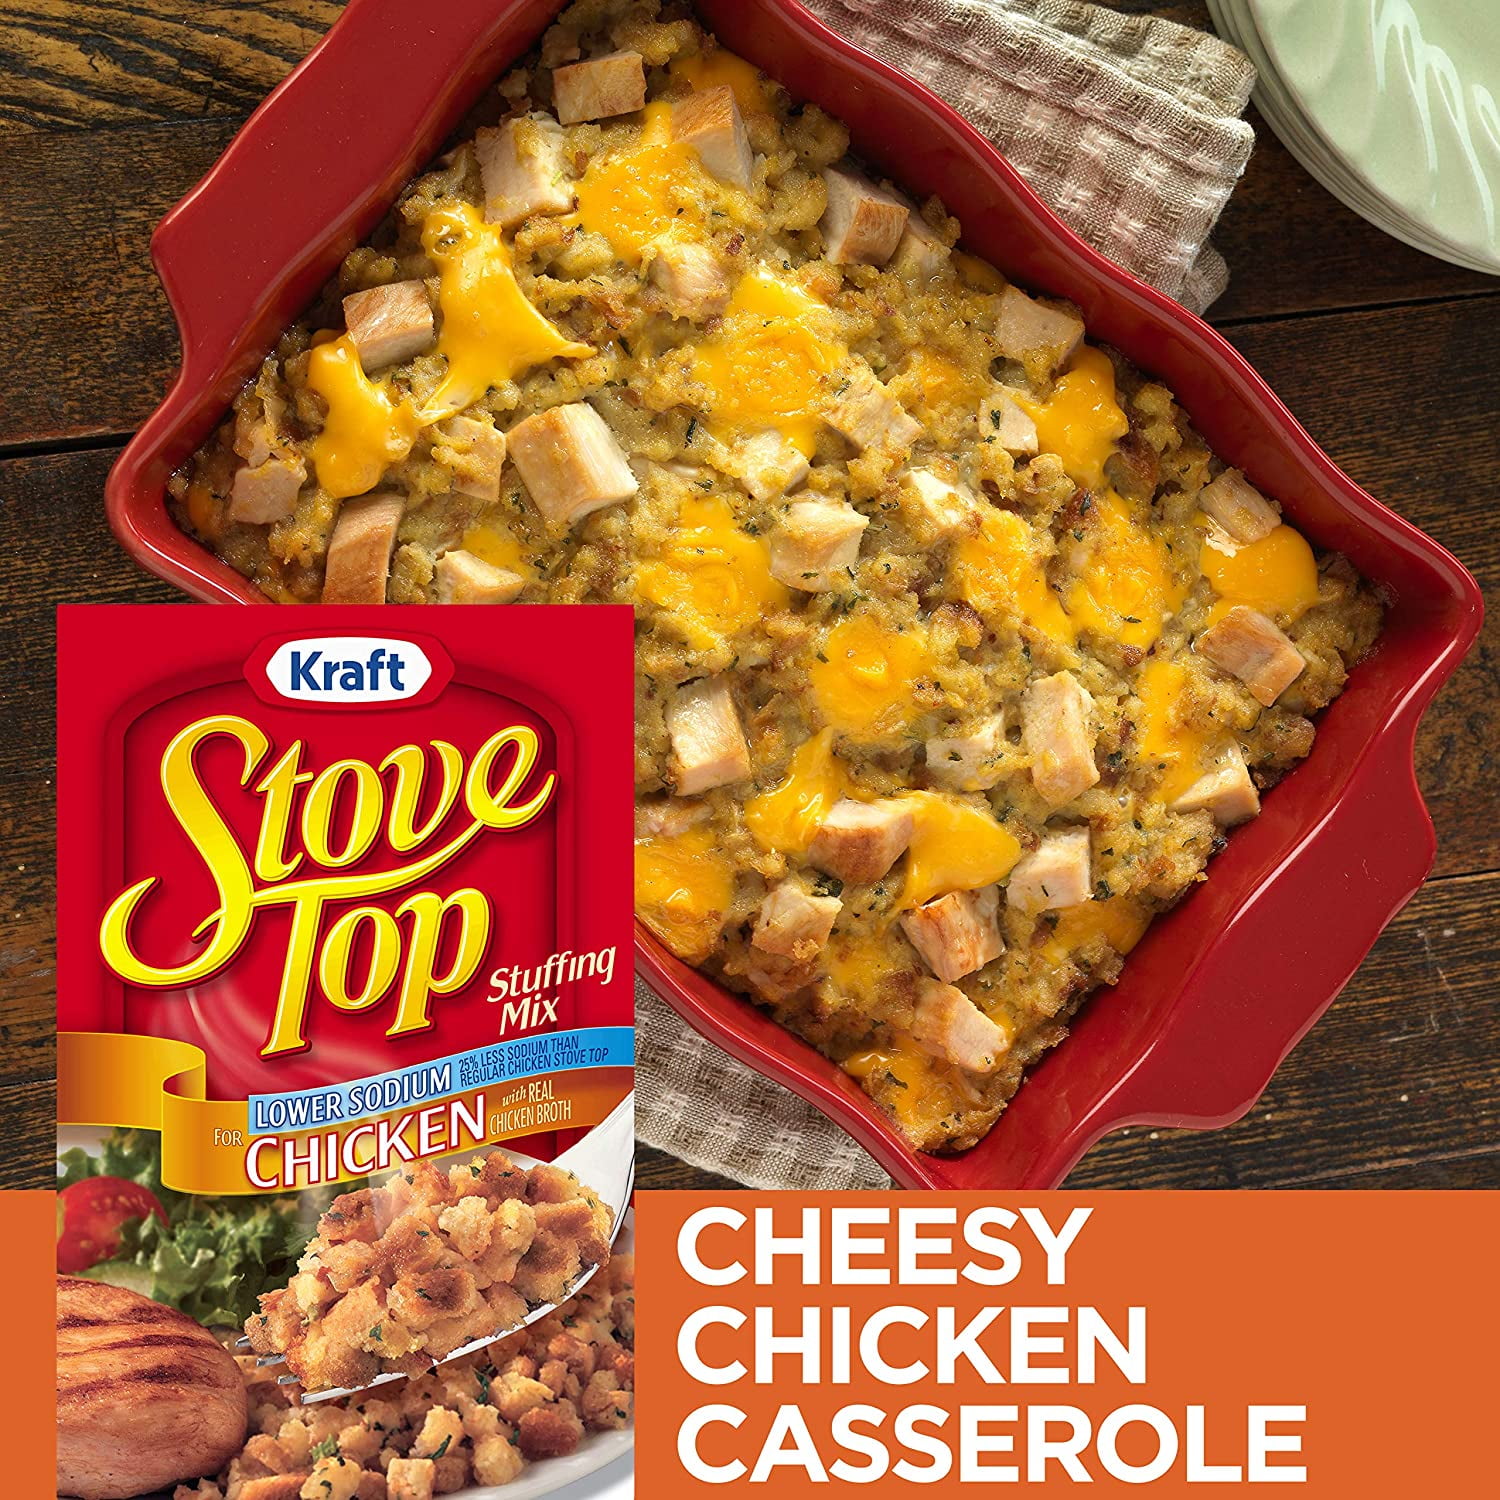 Stove Top Stuffing Mix, Lower Sodium, Chicken